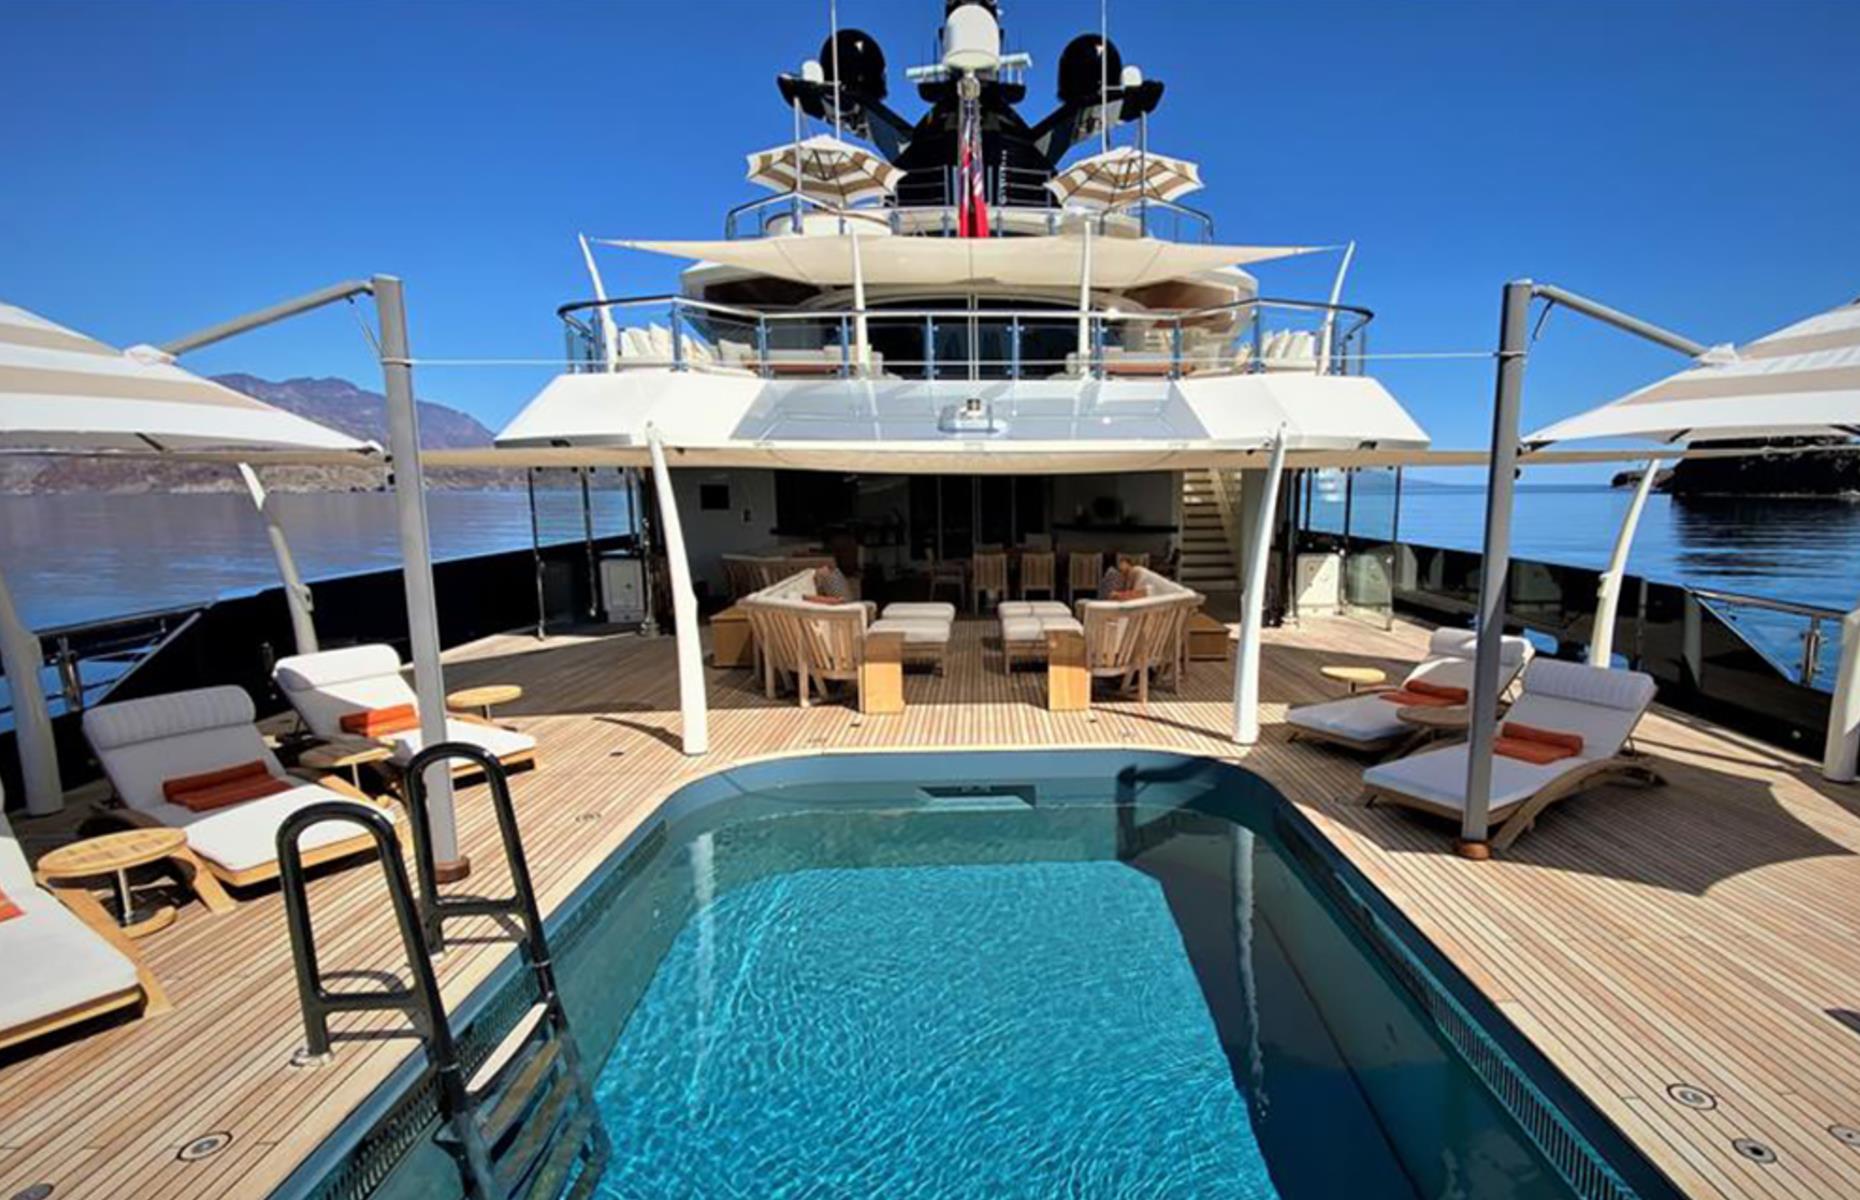 <p>Spielberg's Seven Seas superyacht has plenty of places to unwind, including a swimming pool on a partially-covered 2,700-square-foot (250 square metre) deck. The area has sun loungers for swimmers to relax on, as well as a bar and a dining area that seats 22 people. Either side of the pool are steps down to a swim deck. But the yacht also has a private deck and spa pool, a fitness room and spa with a massage room, sauna and steam room.</p>  <p>It also has a main living space the size of a ballroom and, unsurprisingly, the acclaimed movie director's custom boat has a film screening room. The large room has tiered, cinema-style sofas, a full bar and even a baby grand piano for live music moments.</p>